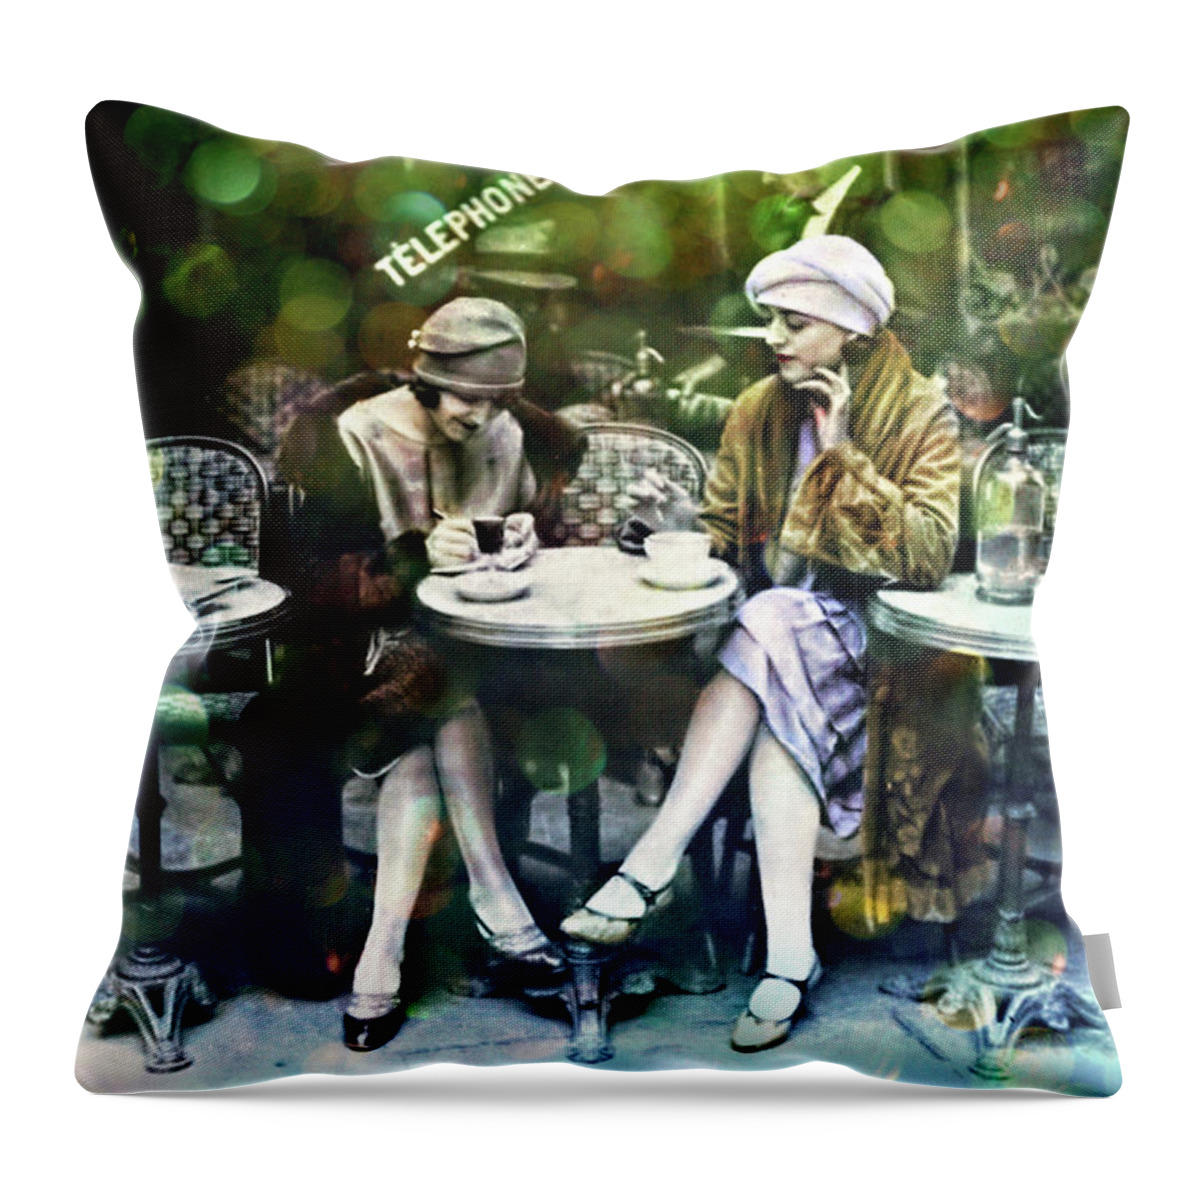 Vintage Print Throw Pillow featuring the photograph Paris Fashionista 1920 by Lilia D